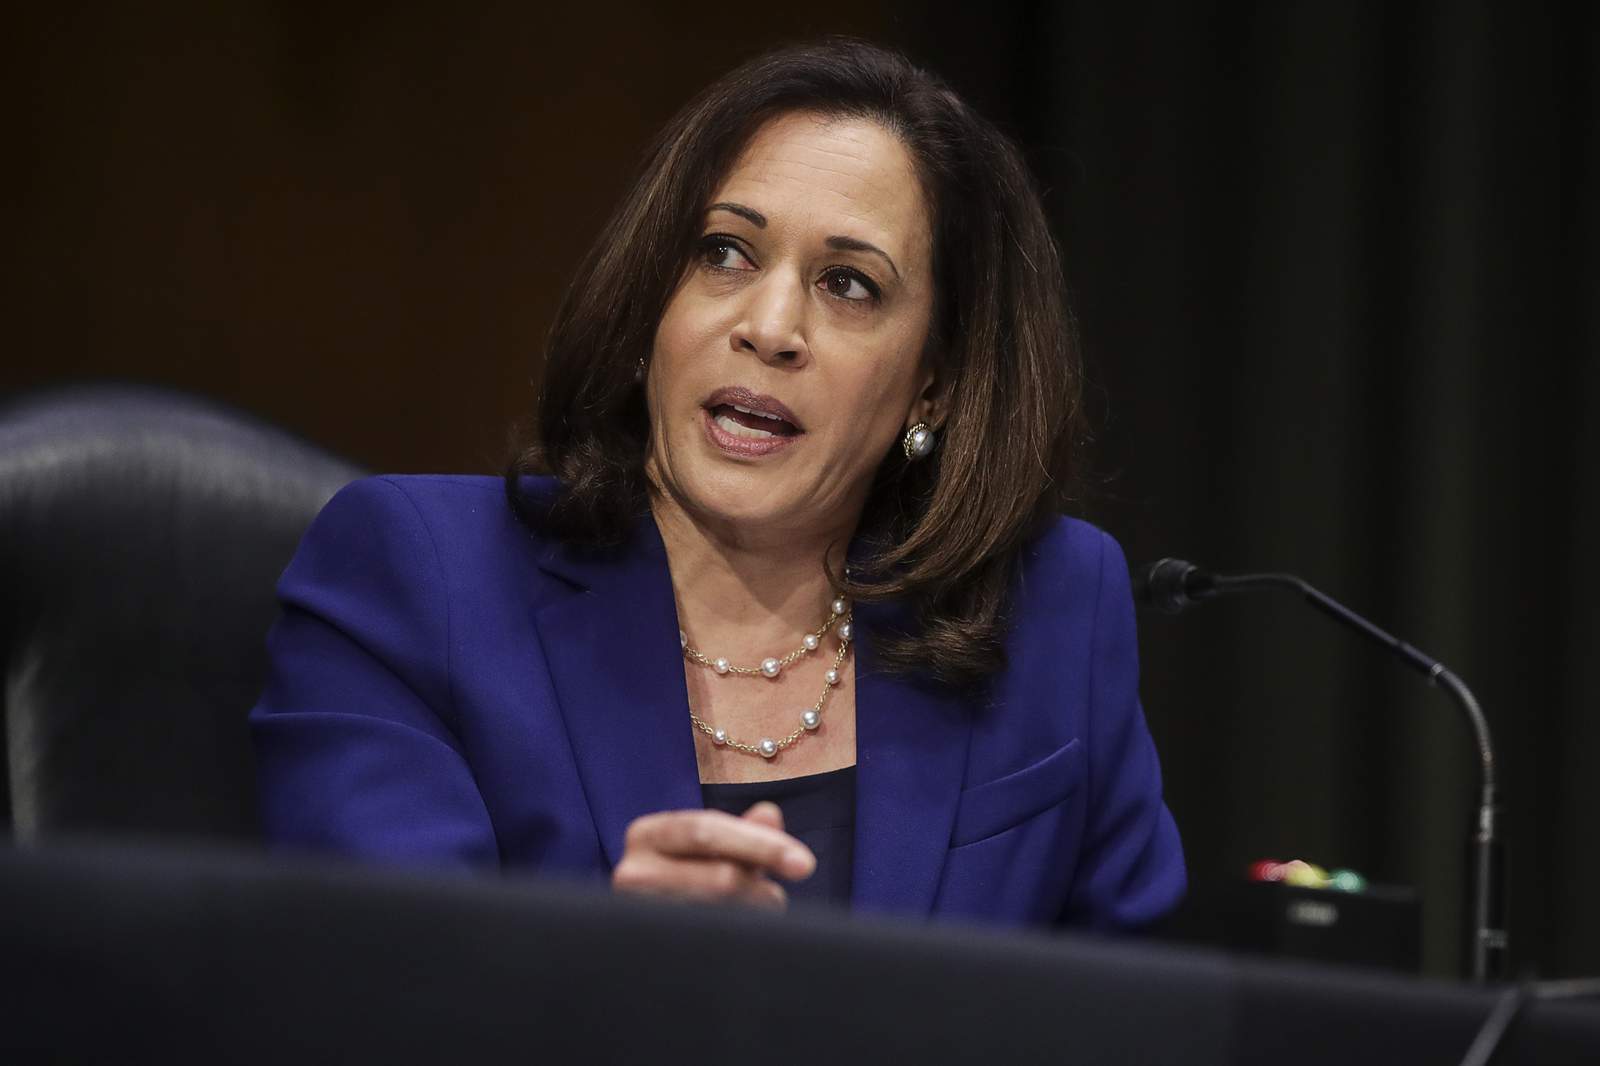 Q&A: Harris says Democrats need to listen to young voters